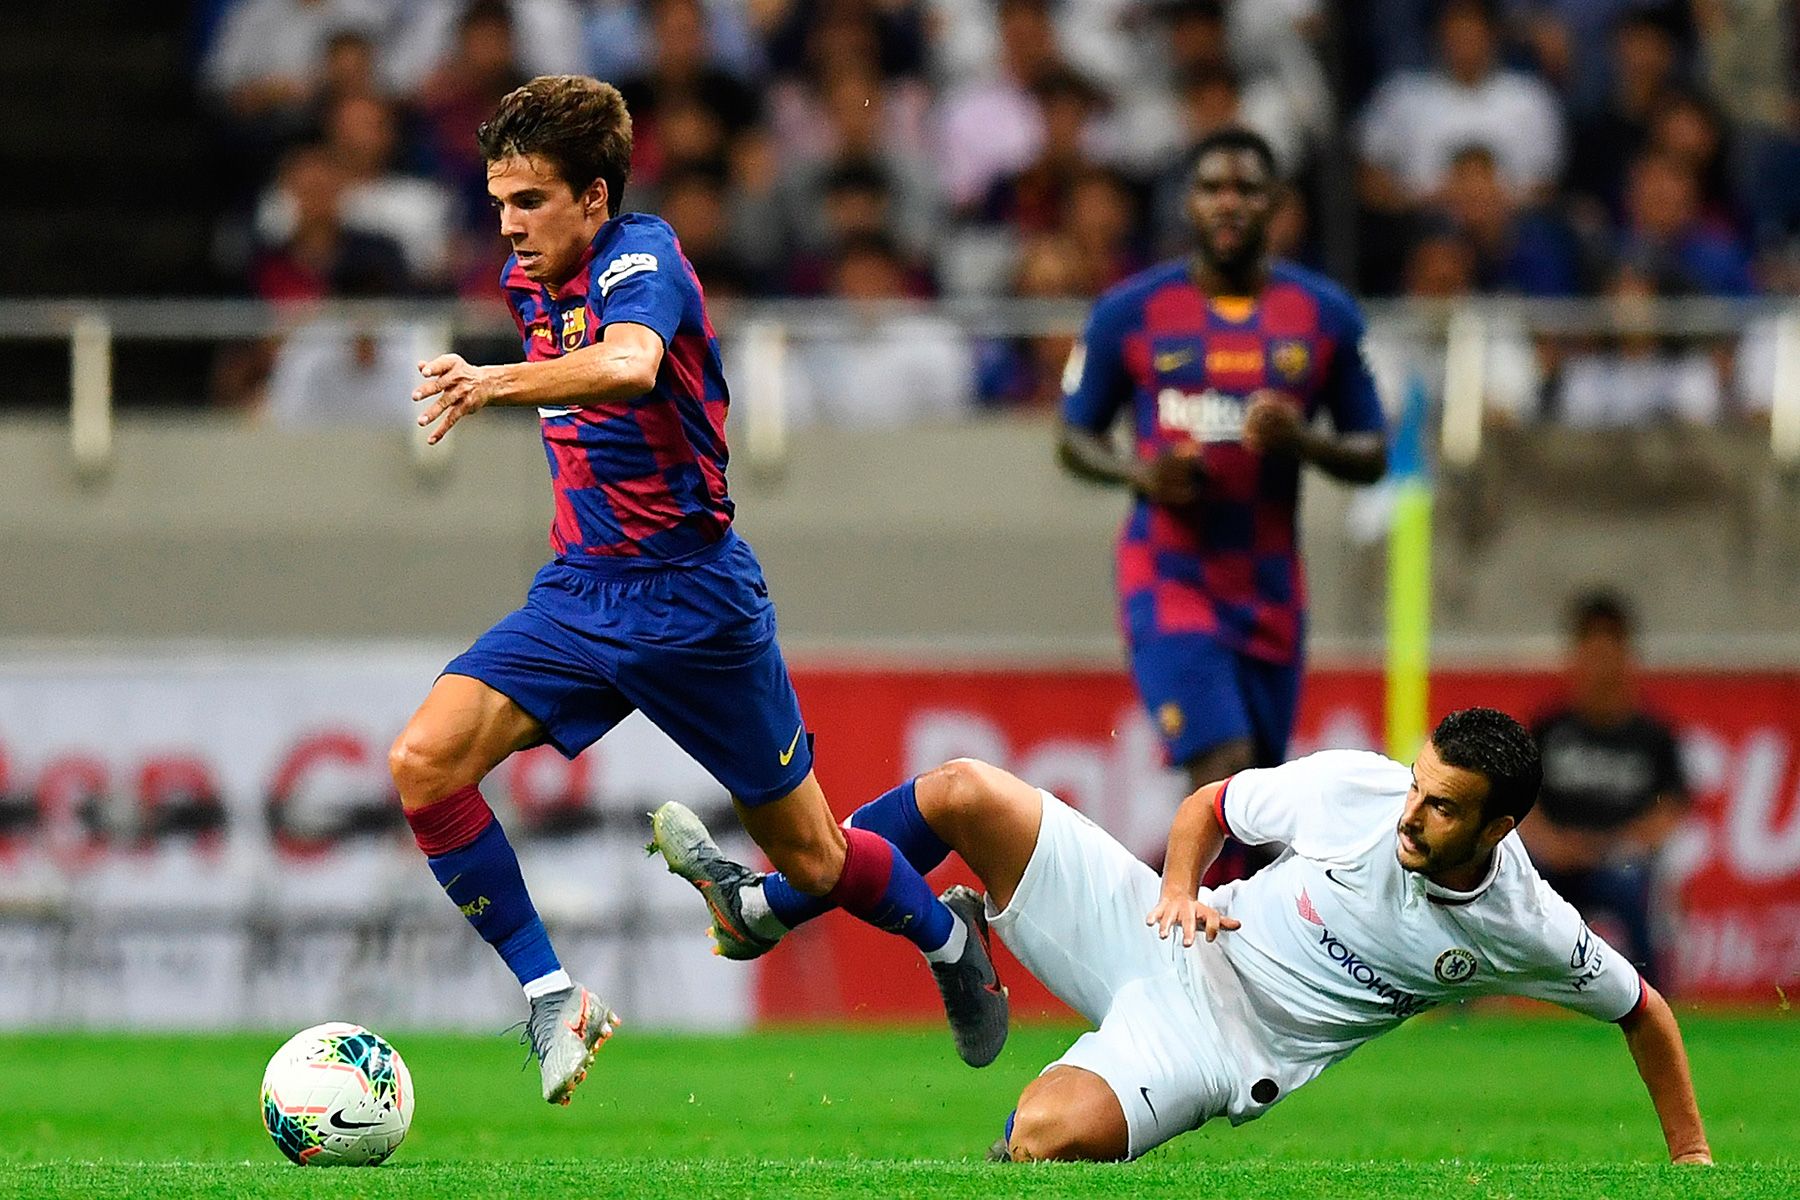 Riqui Puig in the match against Chelsea of the Rakuten Cup